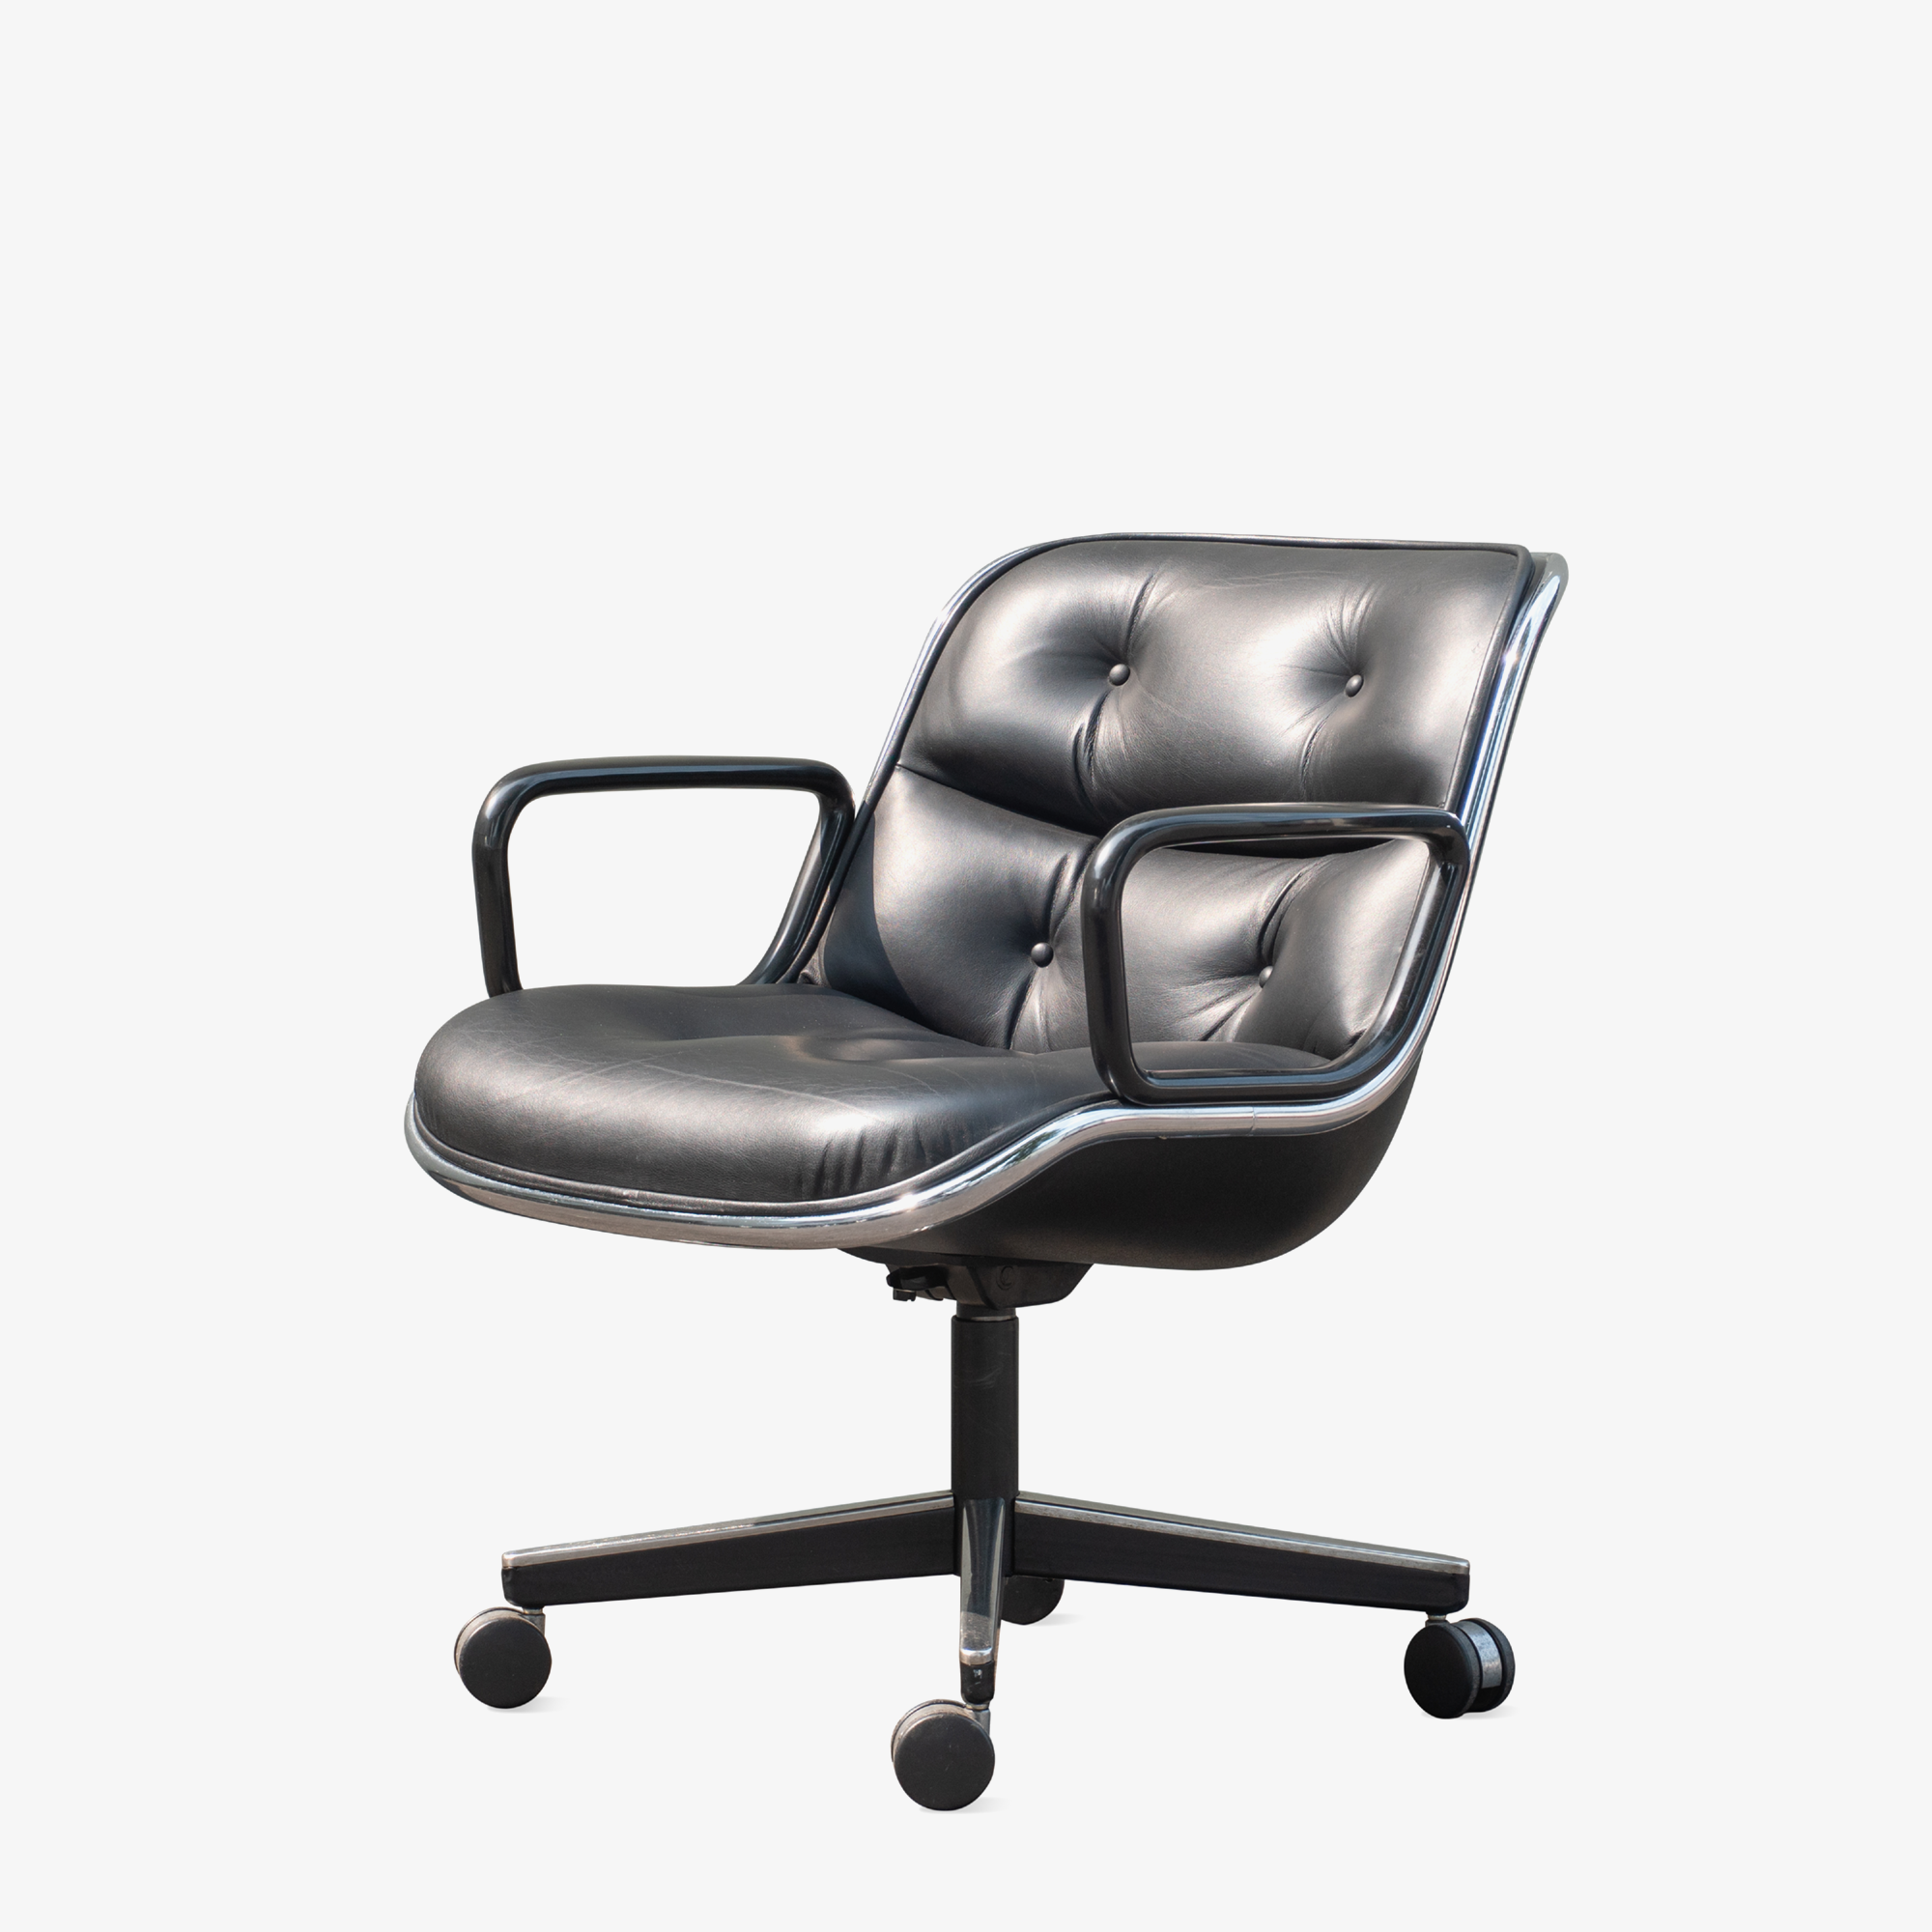 Pollock Executive Chair in Black Leather by Charles Pollock for Knoll - Square4.png